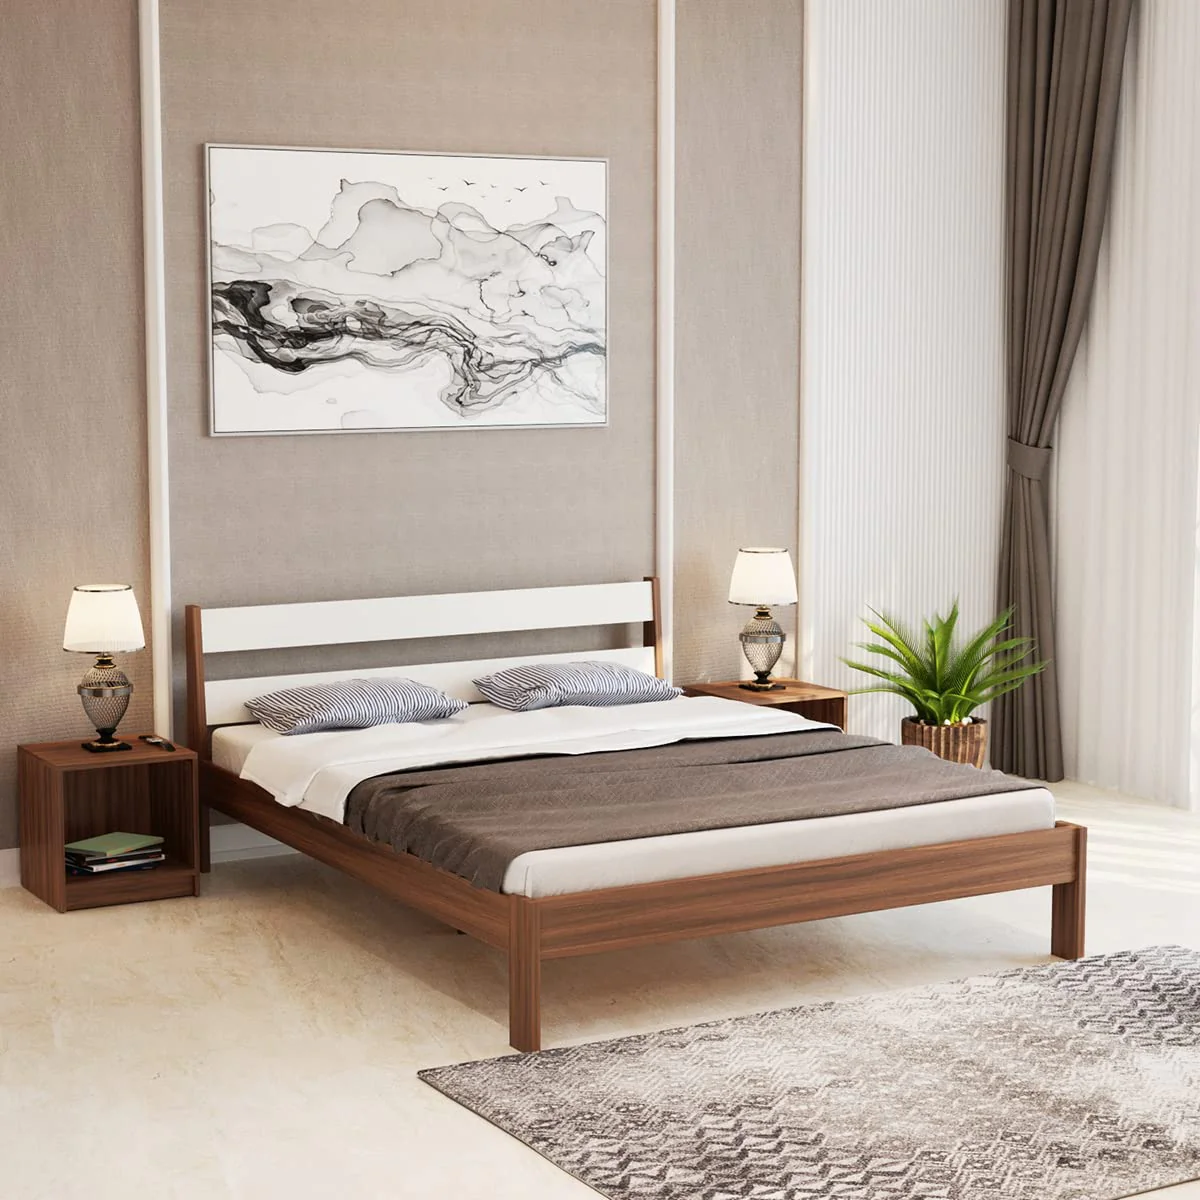 brown bedroom with a modern wood double bed design, grey rug, table, table lamp and a plant